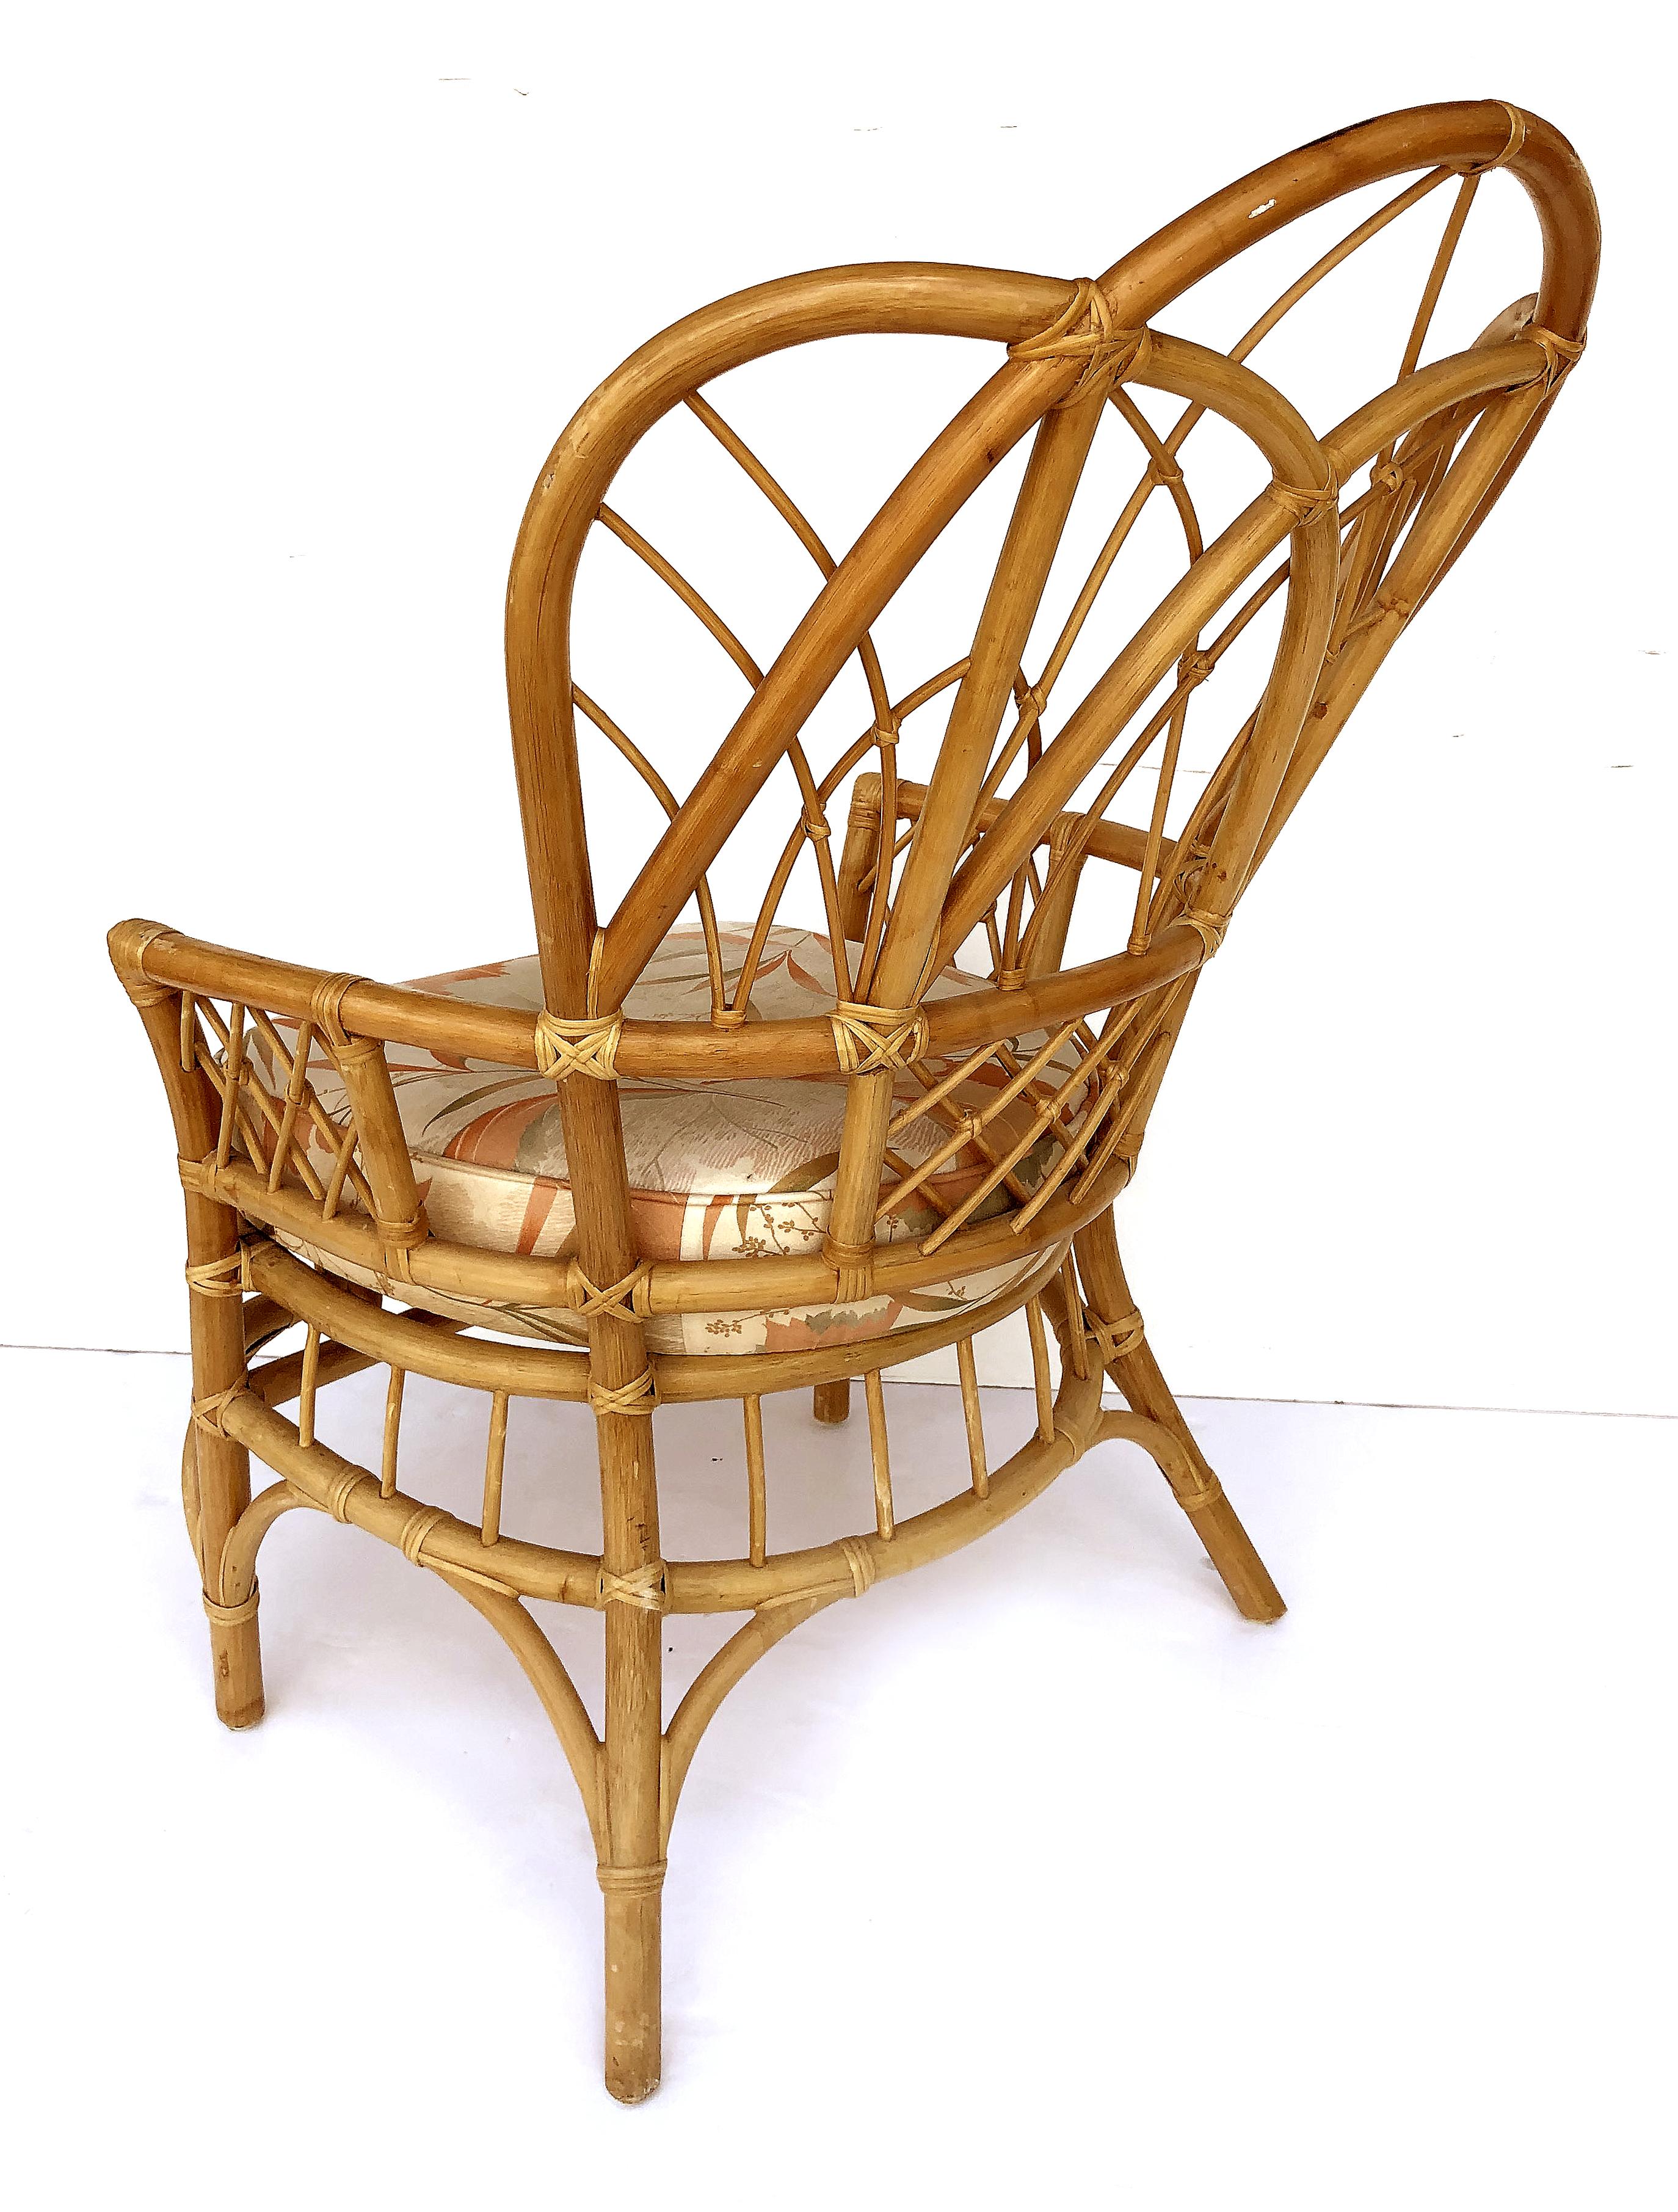 1970s Vintage Coastal Bent Rattan Peacock Chair with Original Upholstery 1